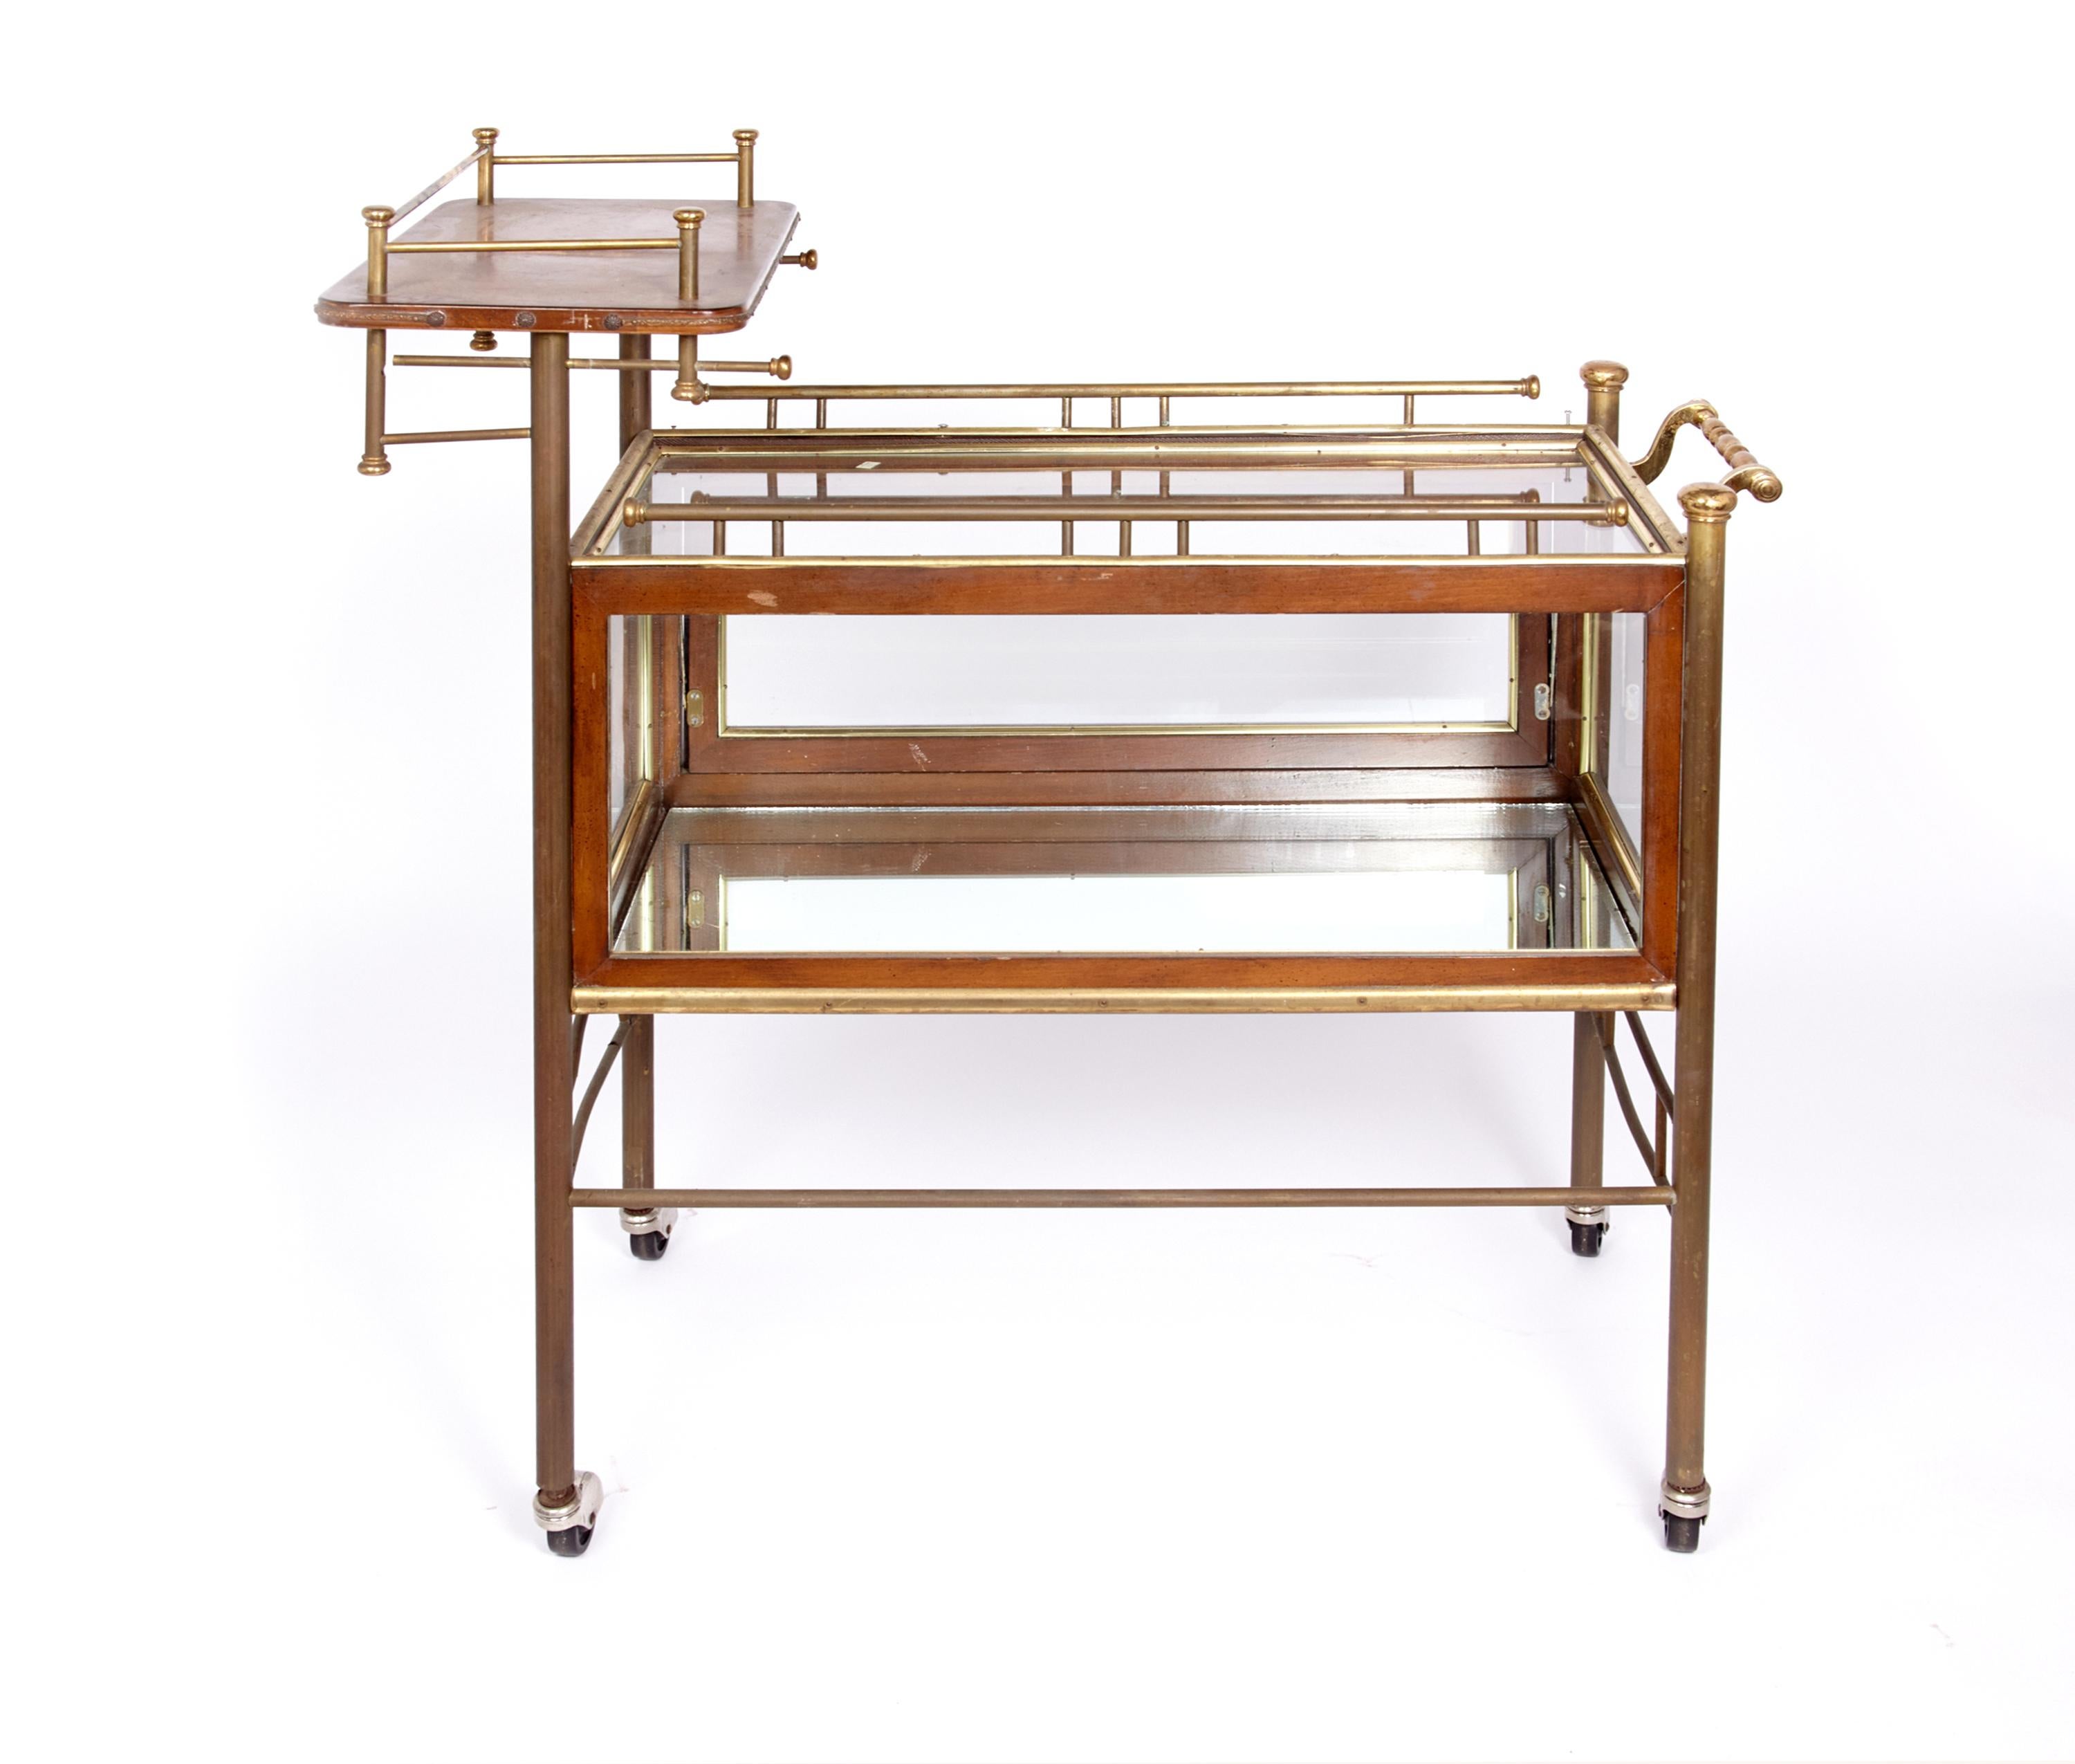 Fabulous rare bar or tea cart with enclosed glass case to display your delicacies whether they be sweet or savory. Beautiful wood and brass with 4 casters to make serving your guests a pleasure. Glass case has flip down front for easy access. The